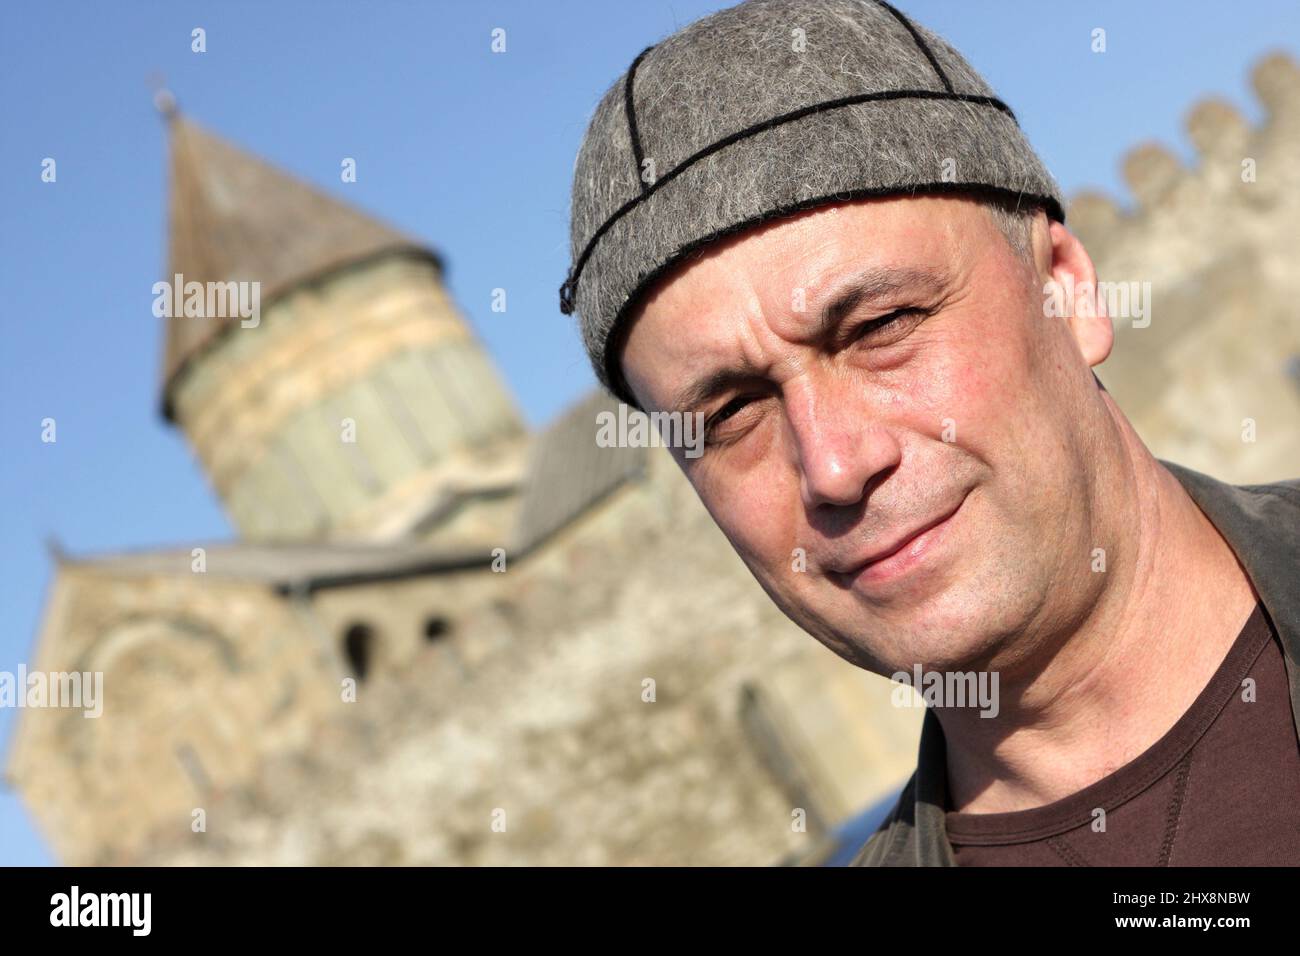 The man poses in national georgian hat on church background in Georgia Stock Photo